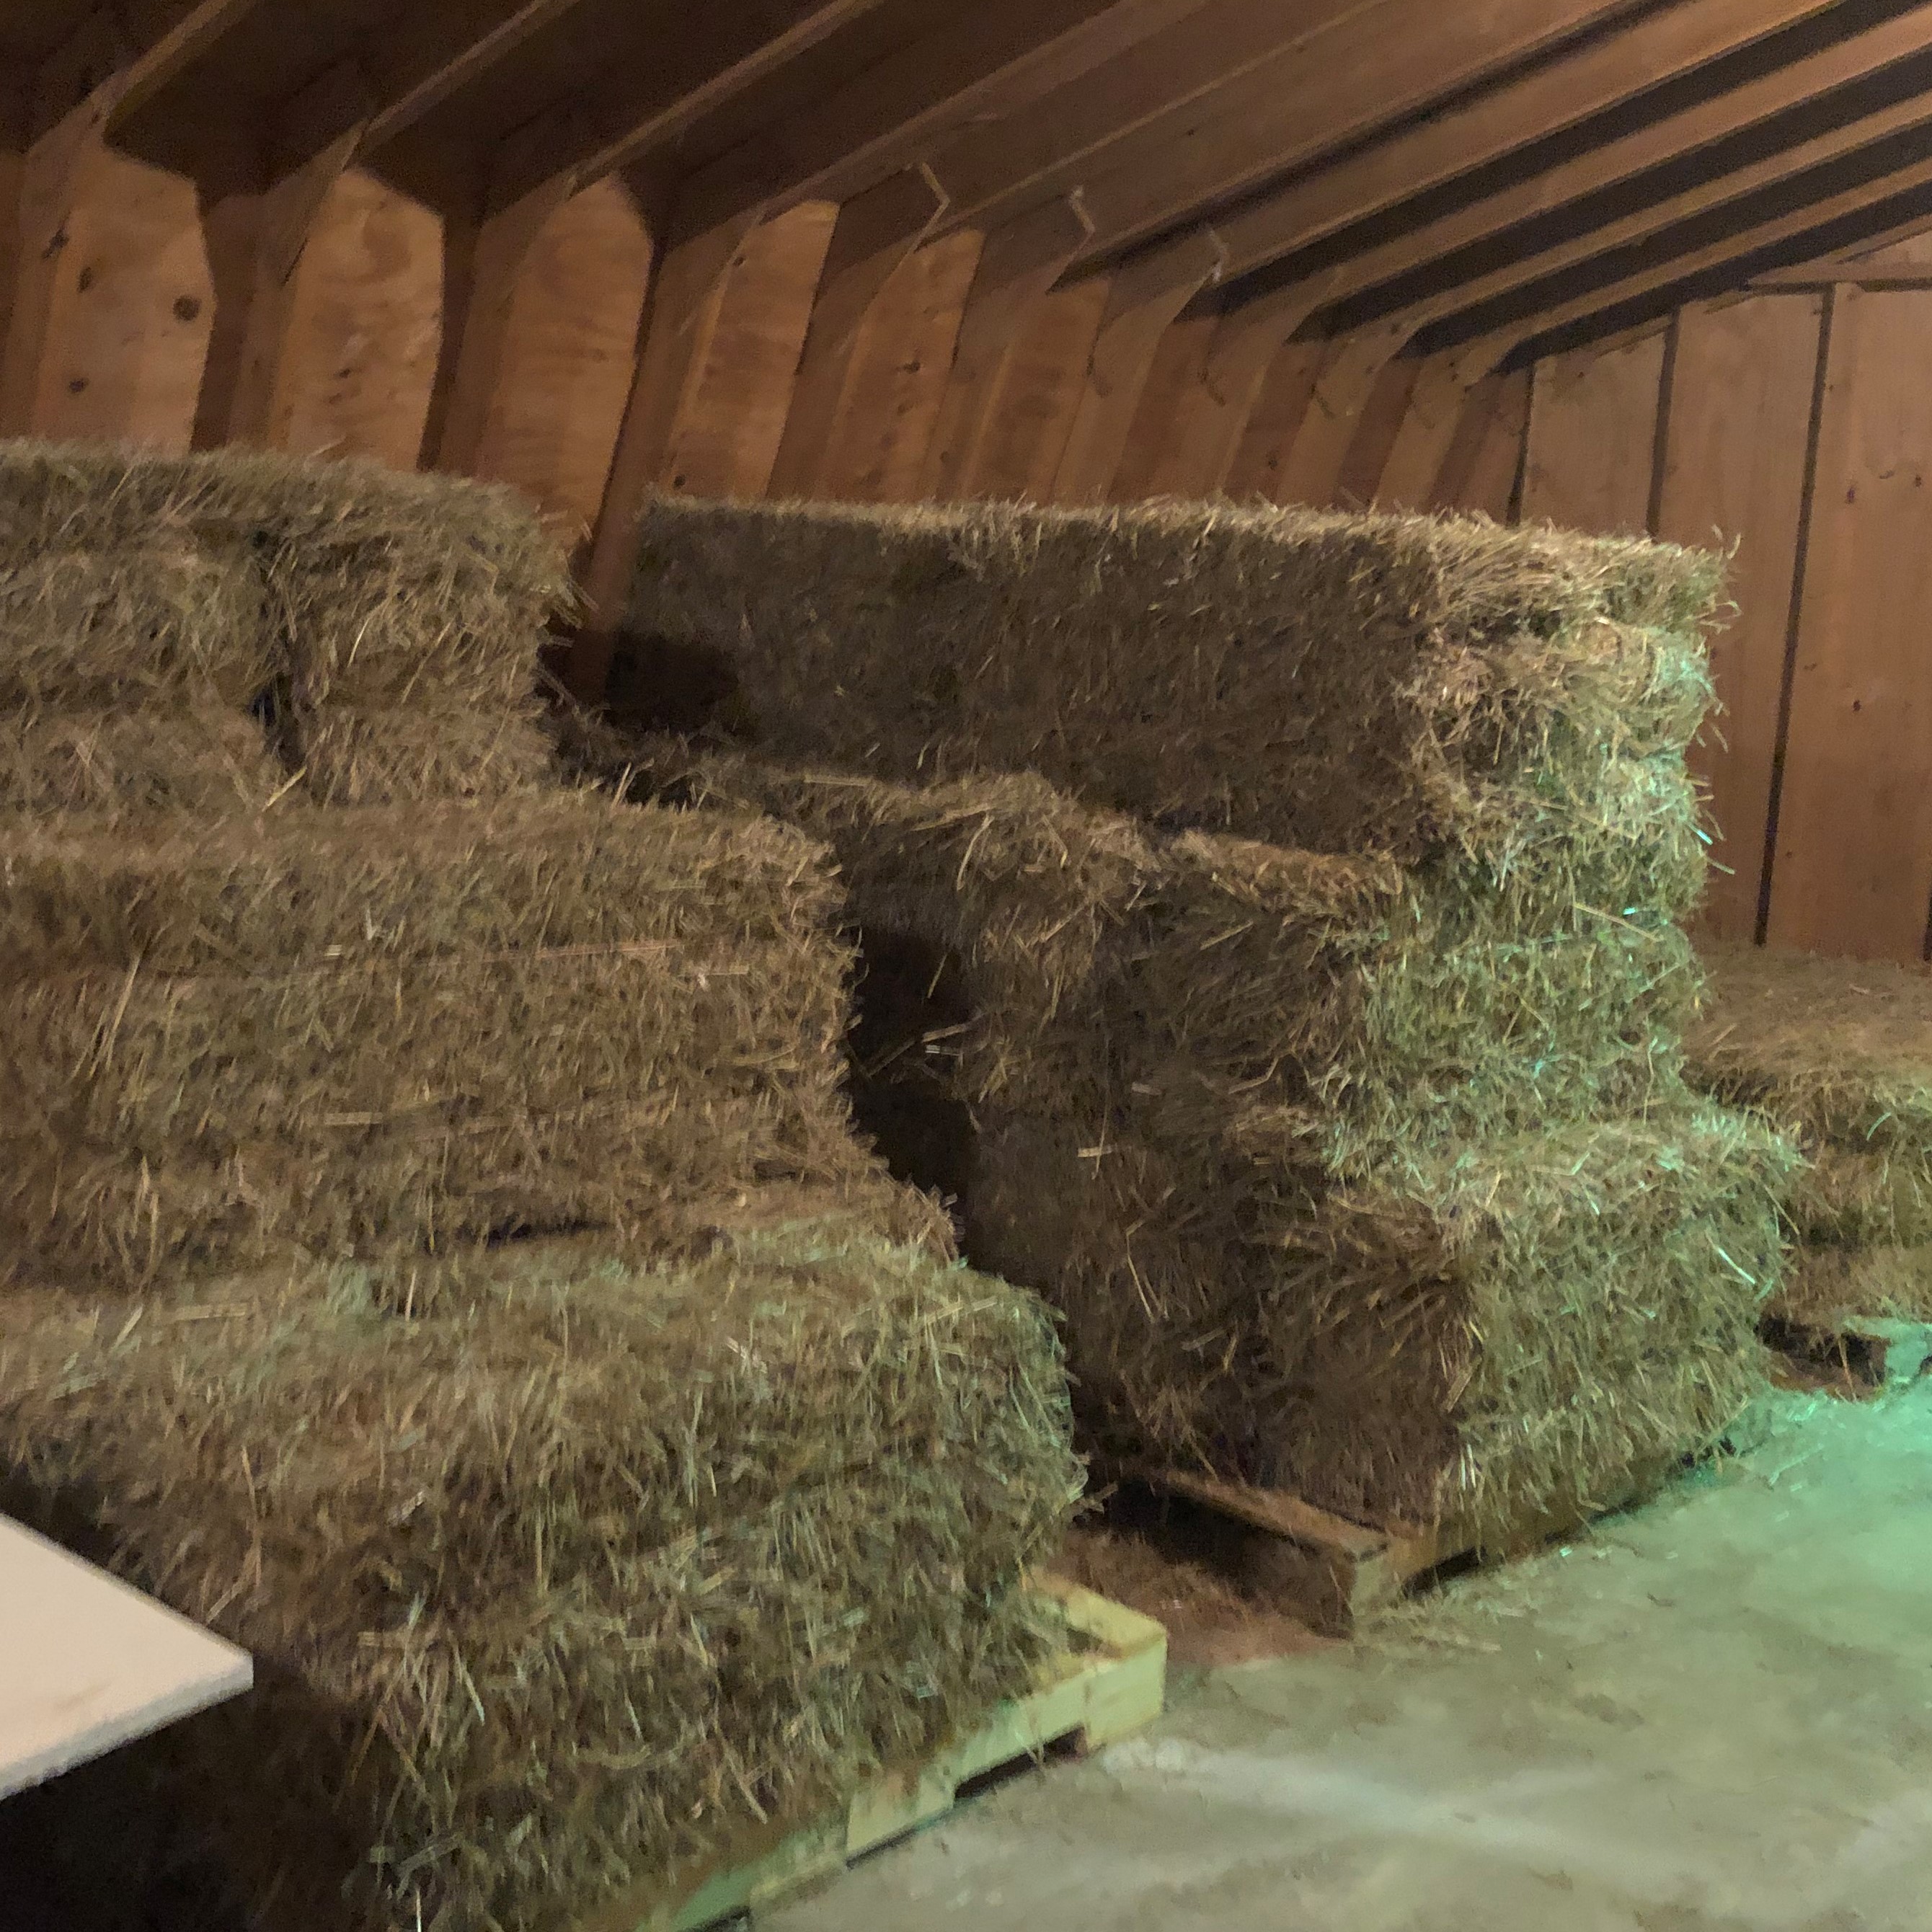 More Storage Room for Hay Bale Restock